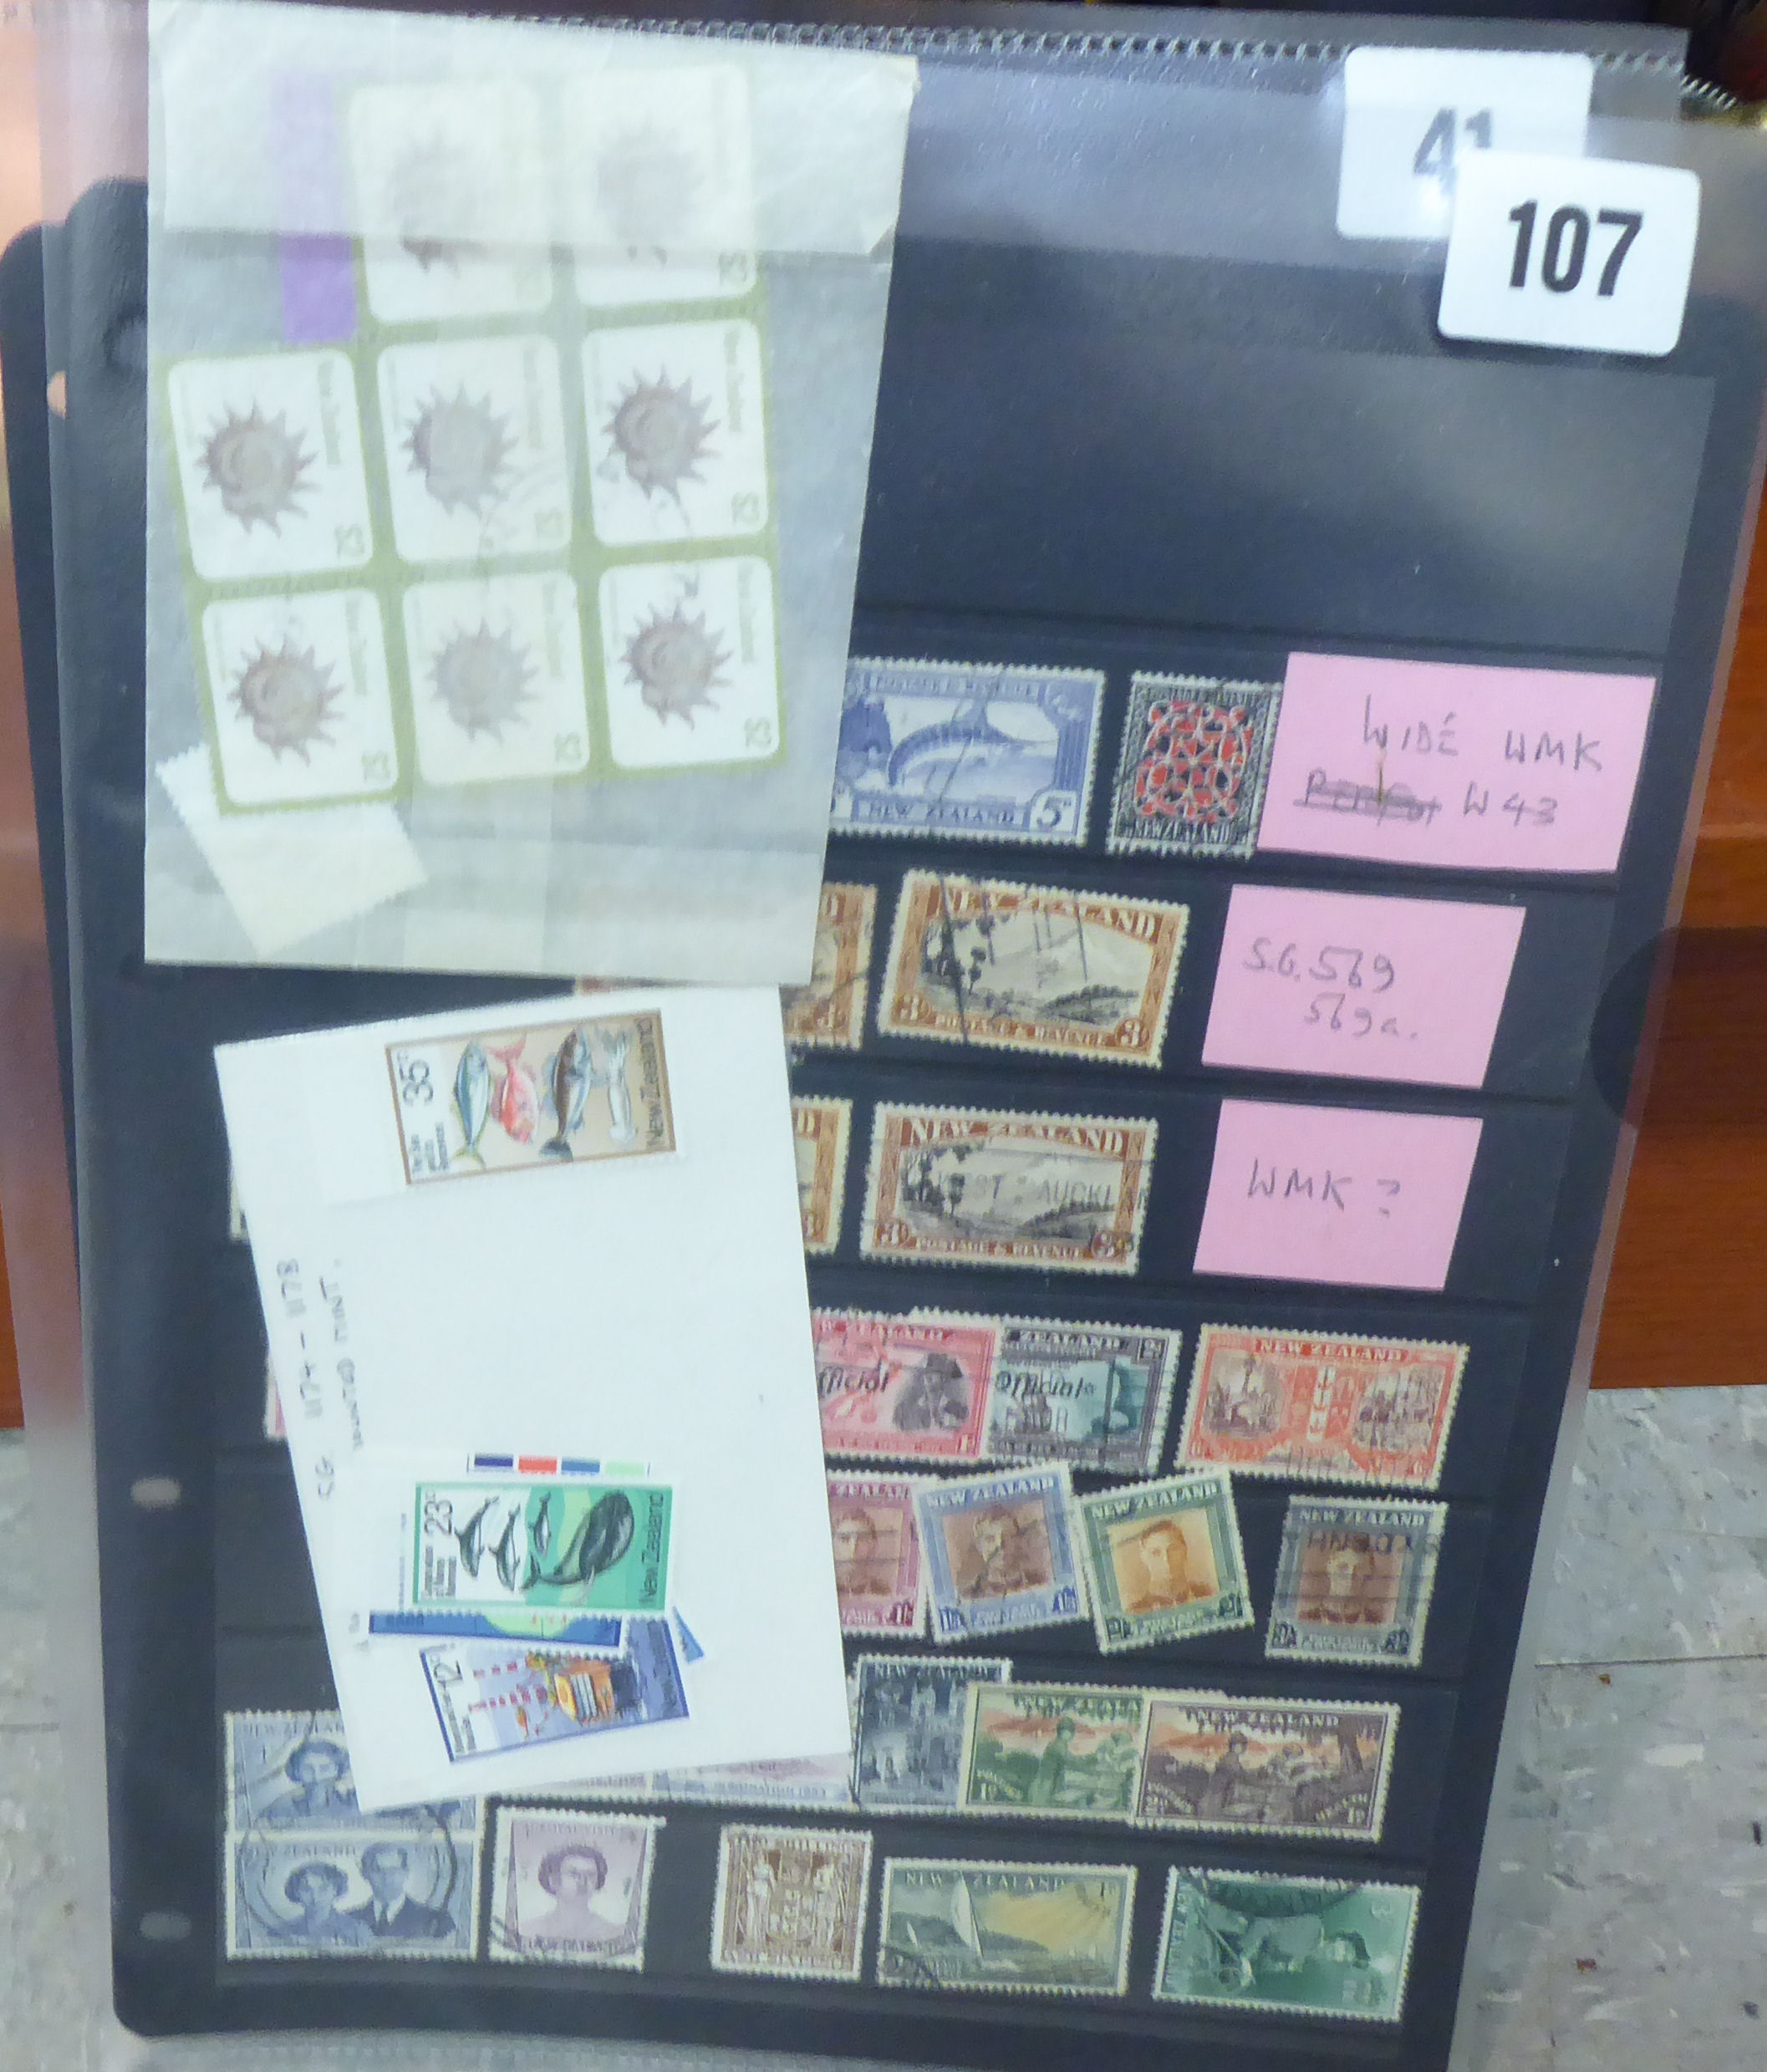 Uncollated postage stamps: to include presentation packs - Image 3 of 6